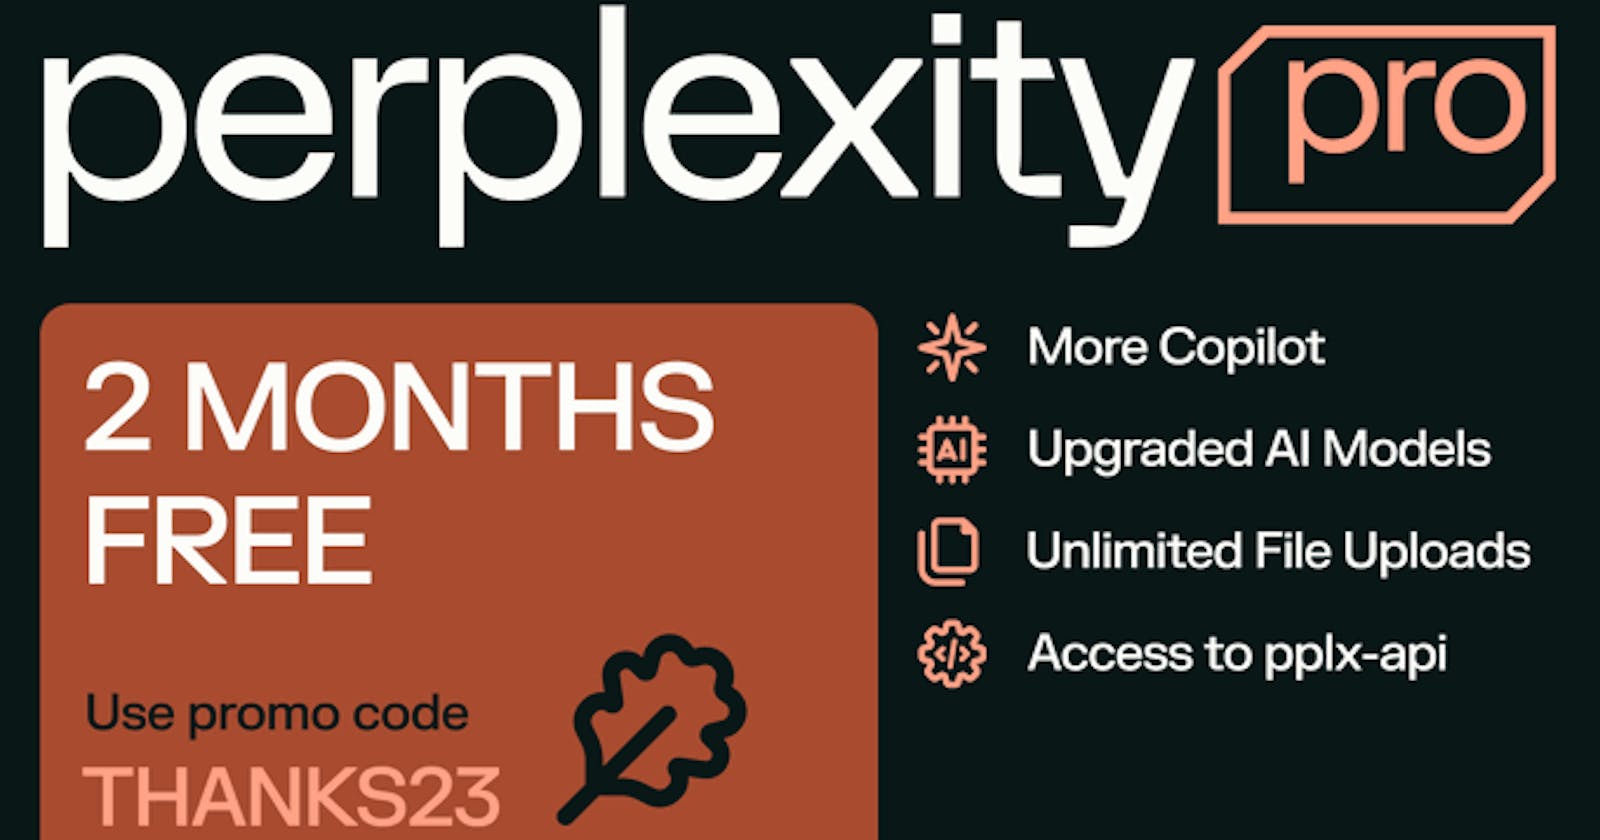 Get 2 months free of Perplexity Pro